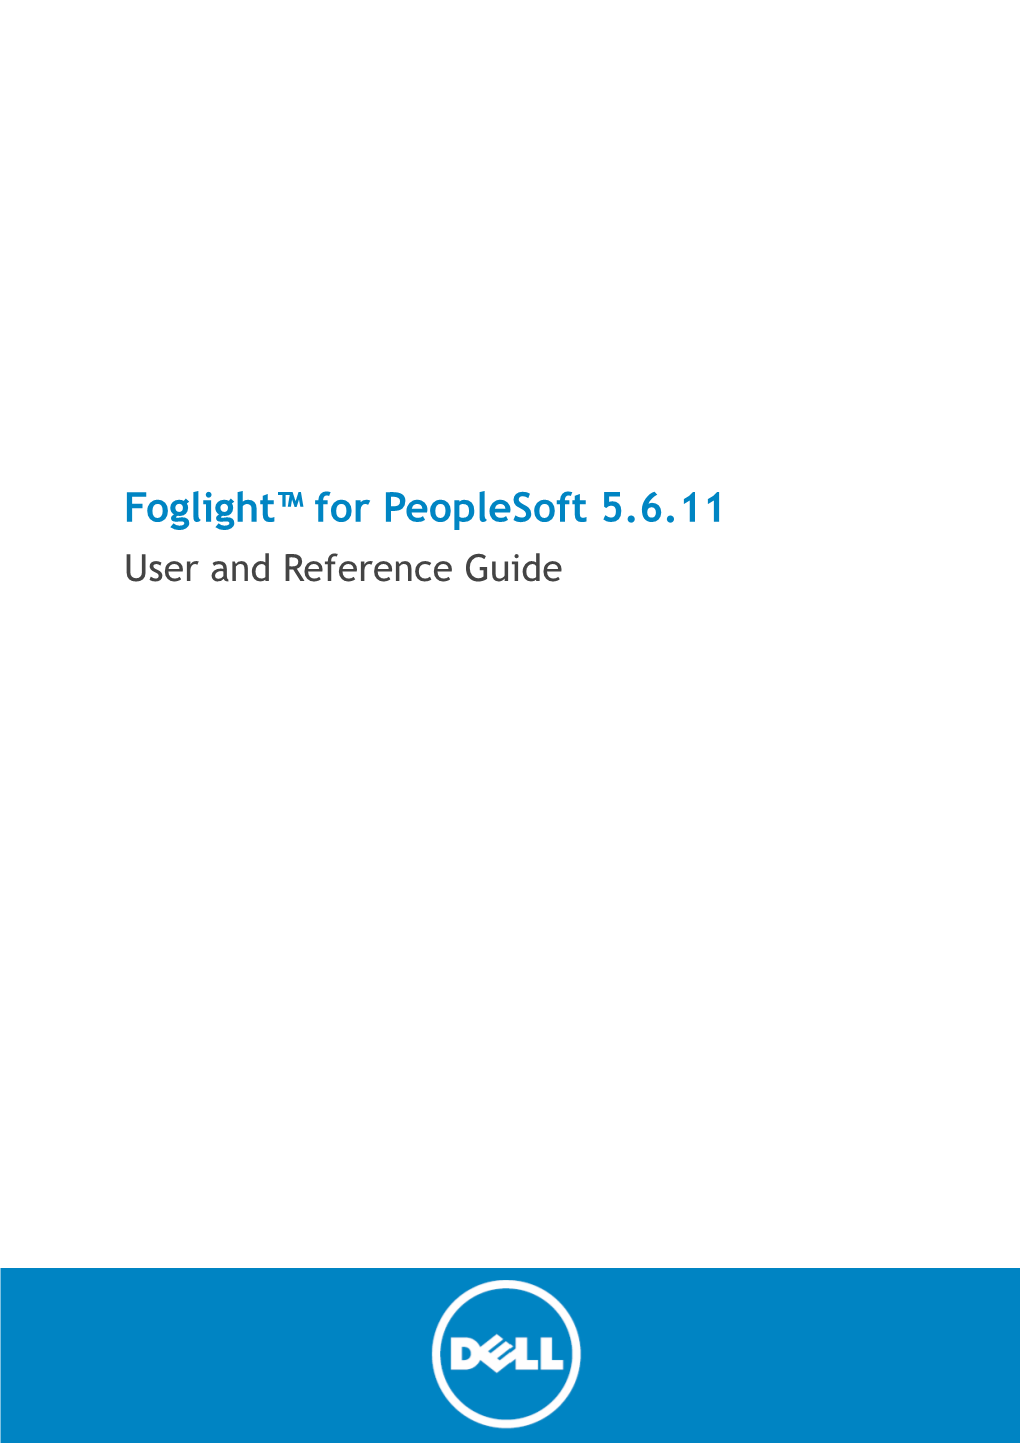 Foglight for Peoplesoft User and Reference Guide Updated - June 2015 Management Server Version - 5.7.5.1 Cartridge Version - 5.6.11 Contents